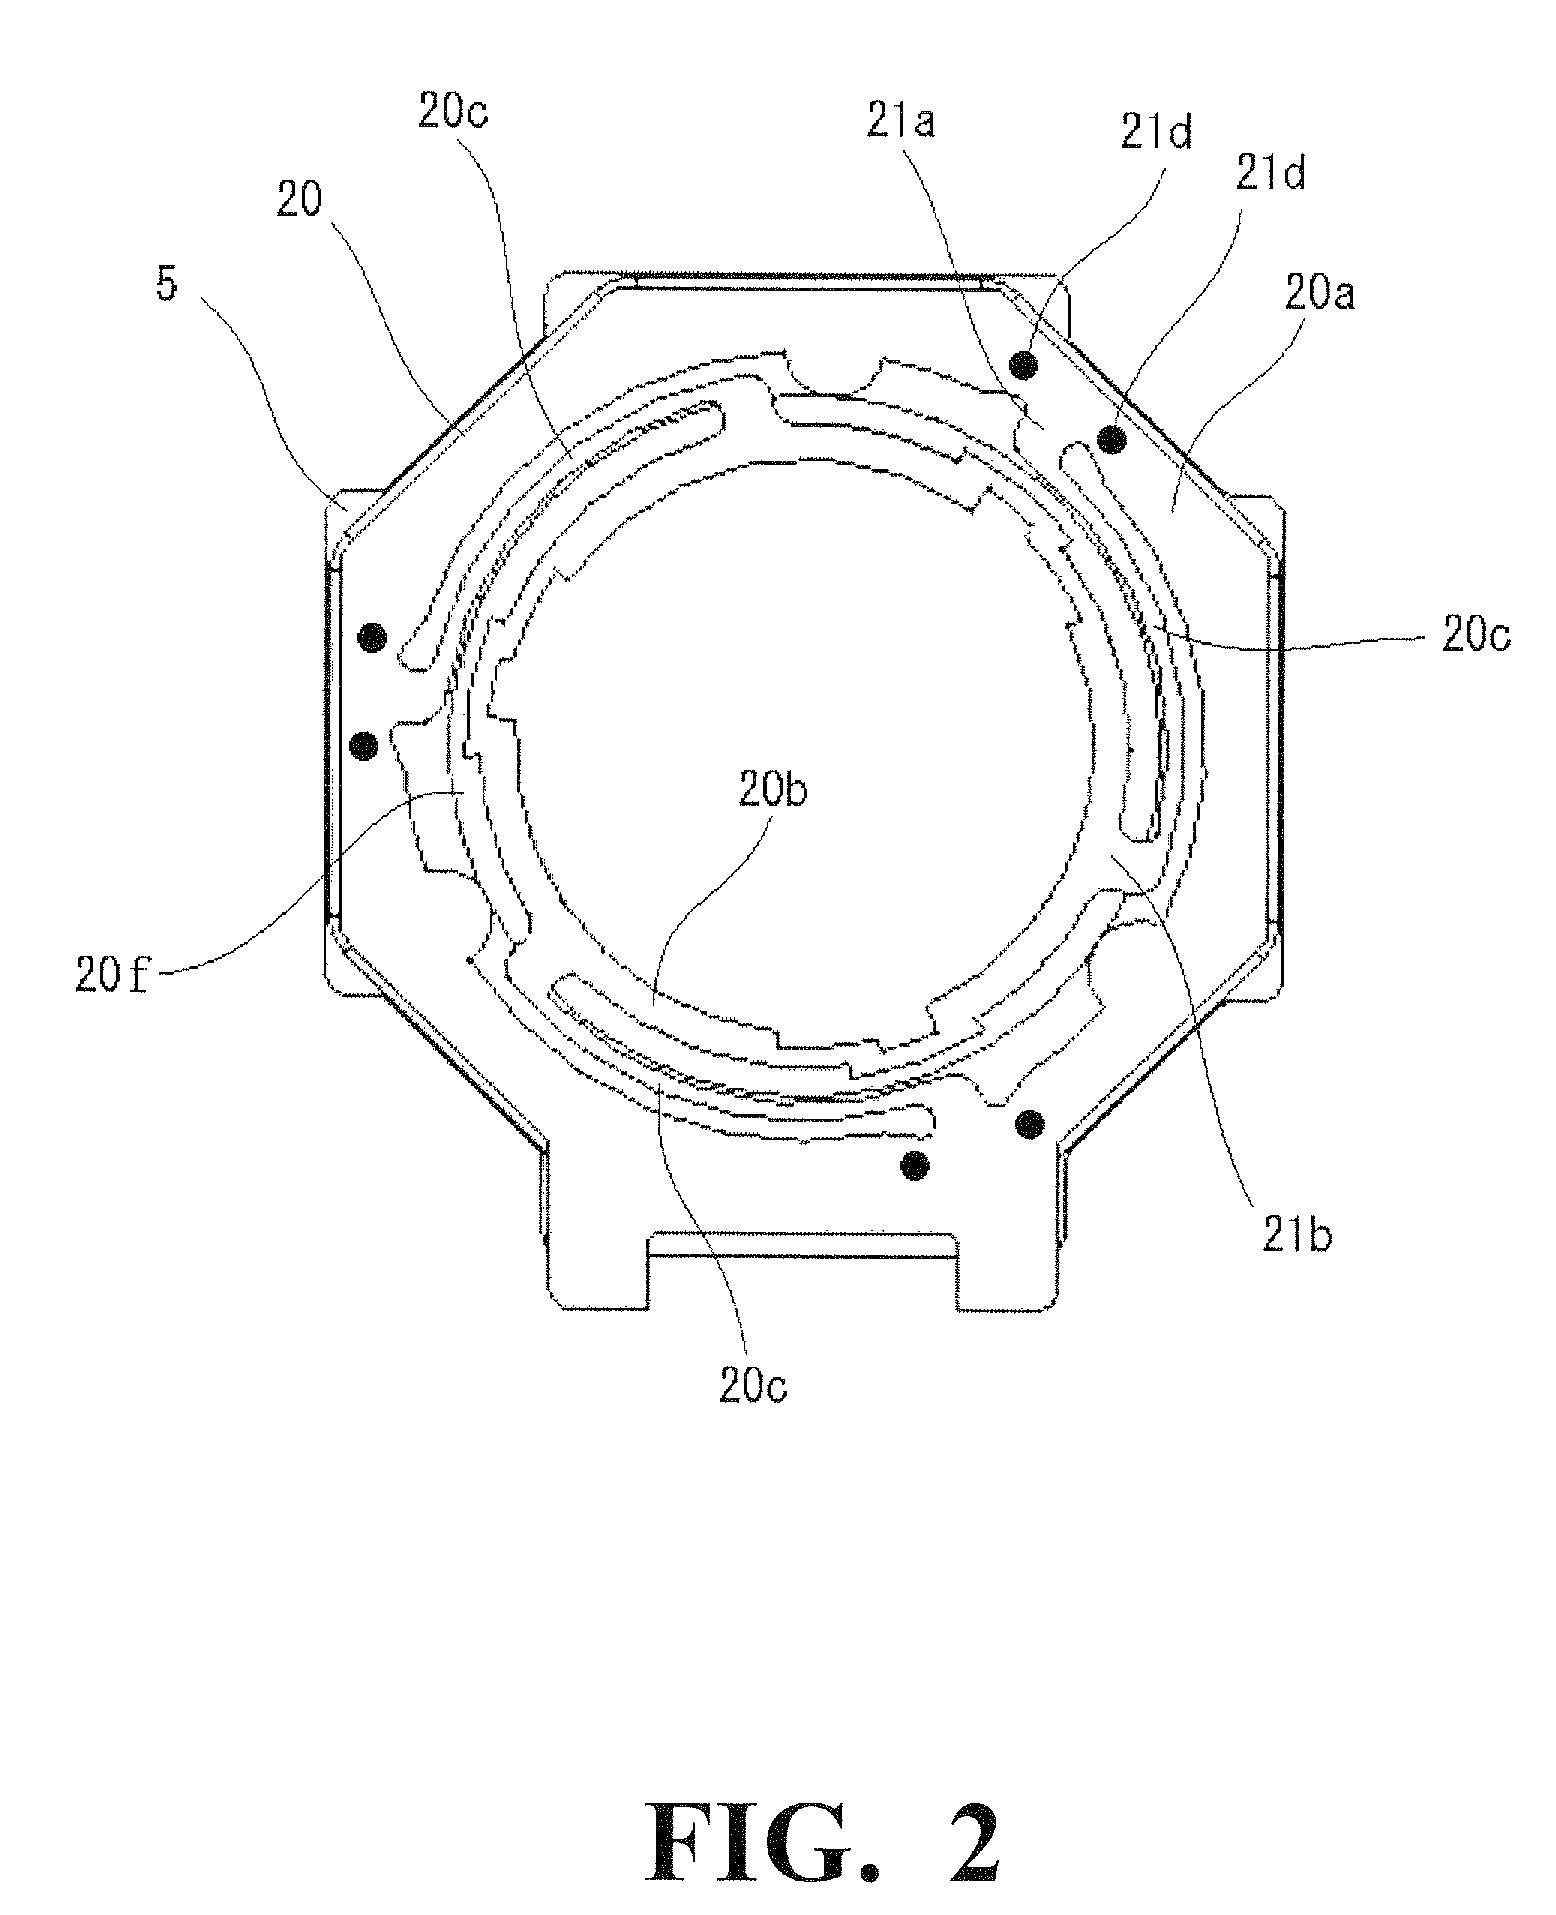 Camera module with improved leaf spring attachment